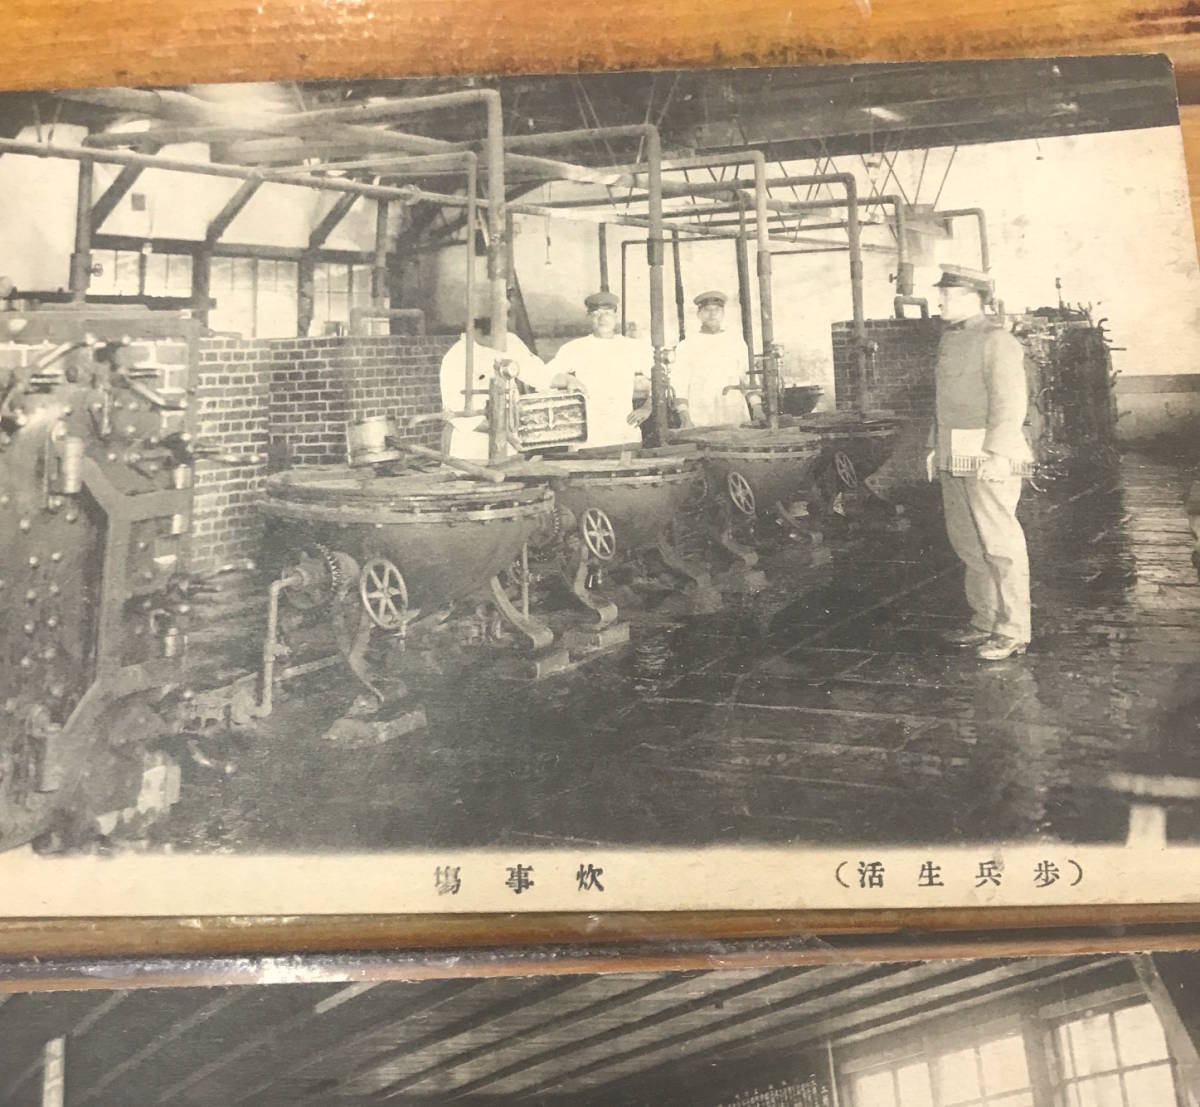  war front picture postcard * together 5 sheets * army relation war old Japan army army life .. navy *.. place point . shoes factory . inside . place . board Ueno angle power * Taisho latter term ~ Showa era the first period 